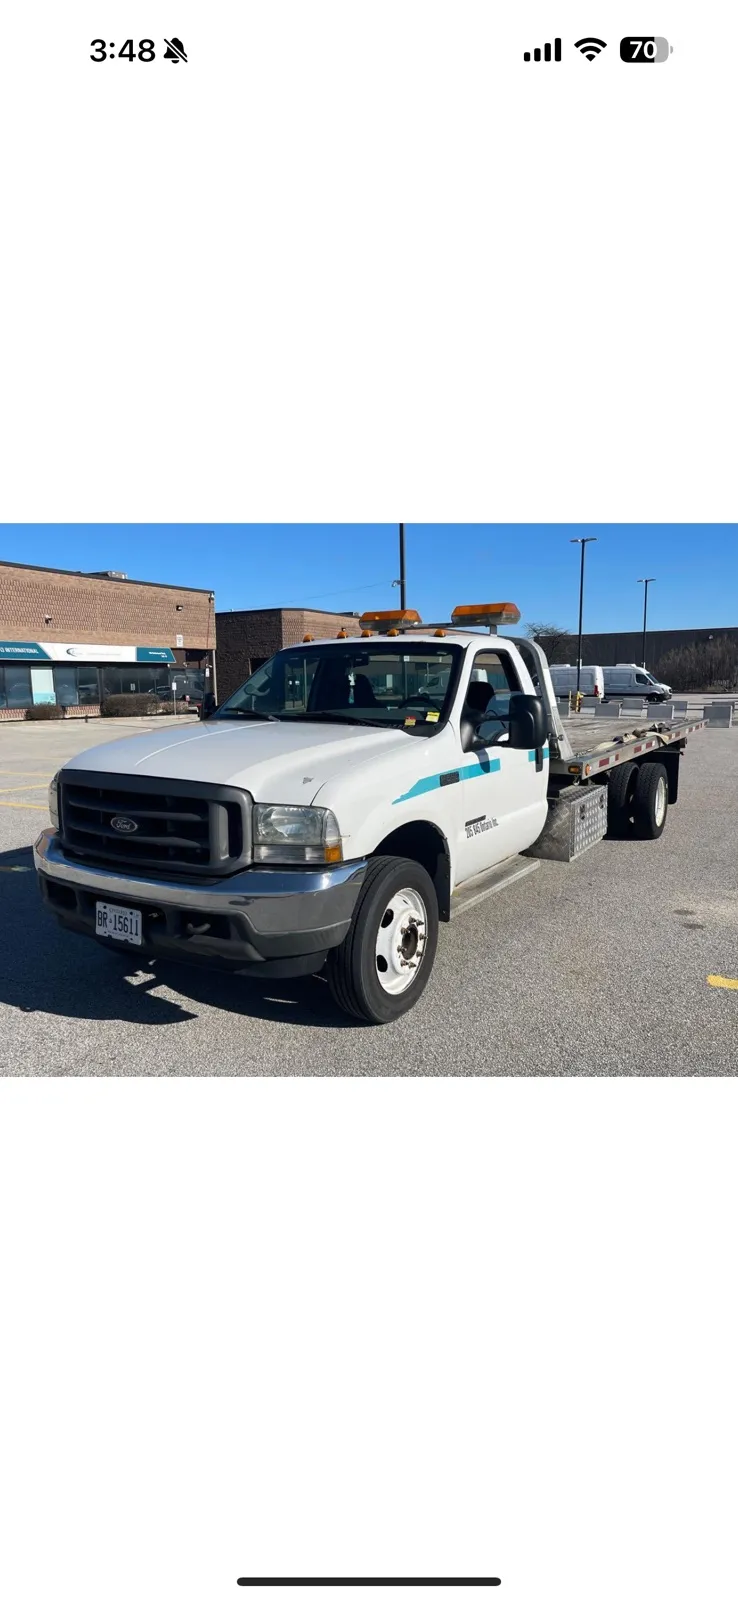 2002 ford tow truck